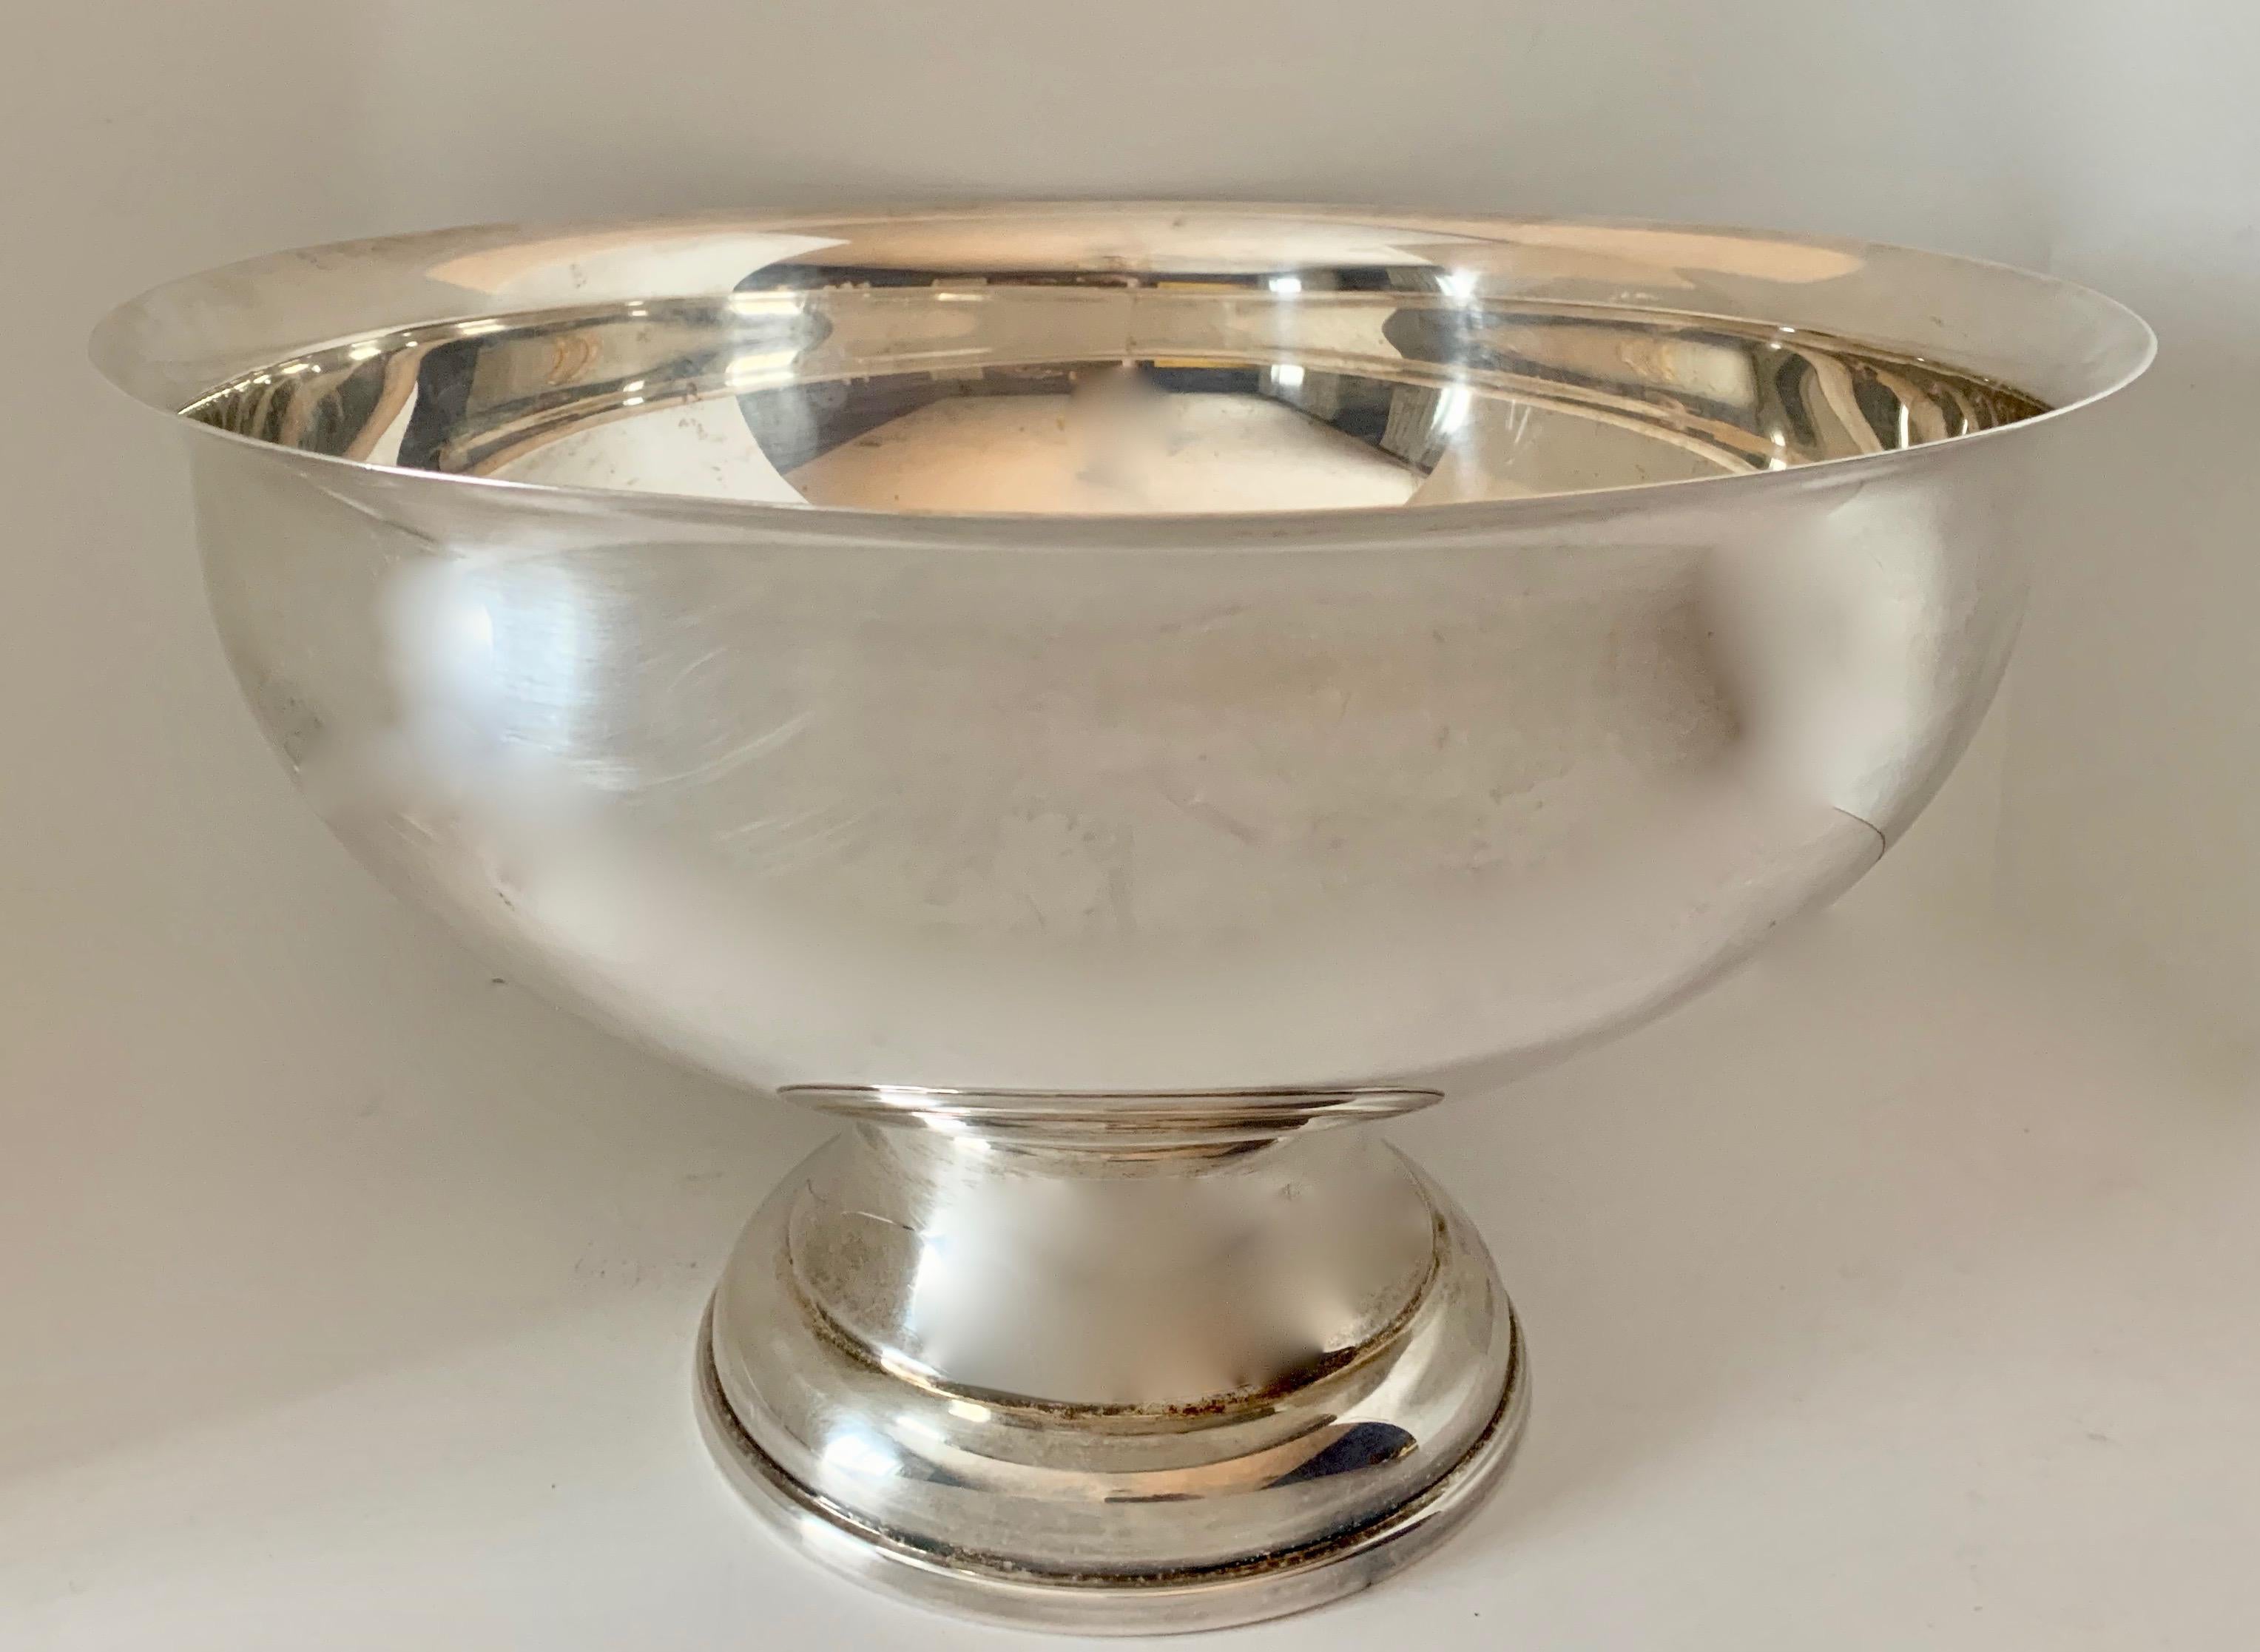 Silver bowl in superb condition. This handsome piece is ready to do everything from display your prized garden roses to celebrate with your homemade spiced punch... or damn, it's so beautiful, like Gisele it can just sit there and be a ravenous